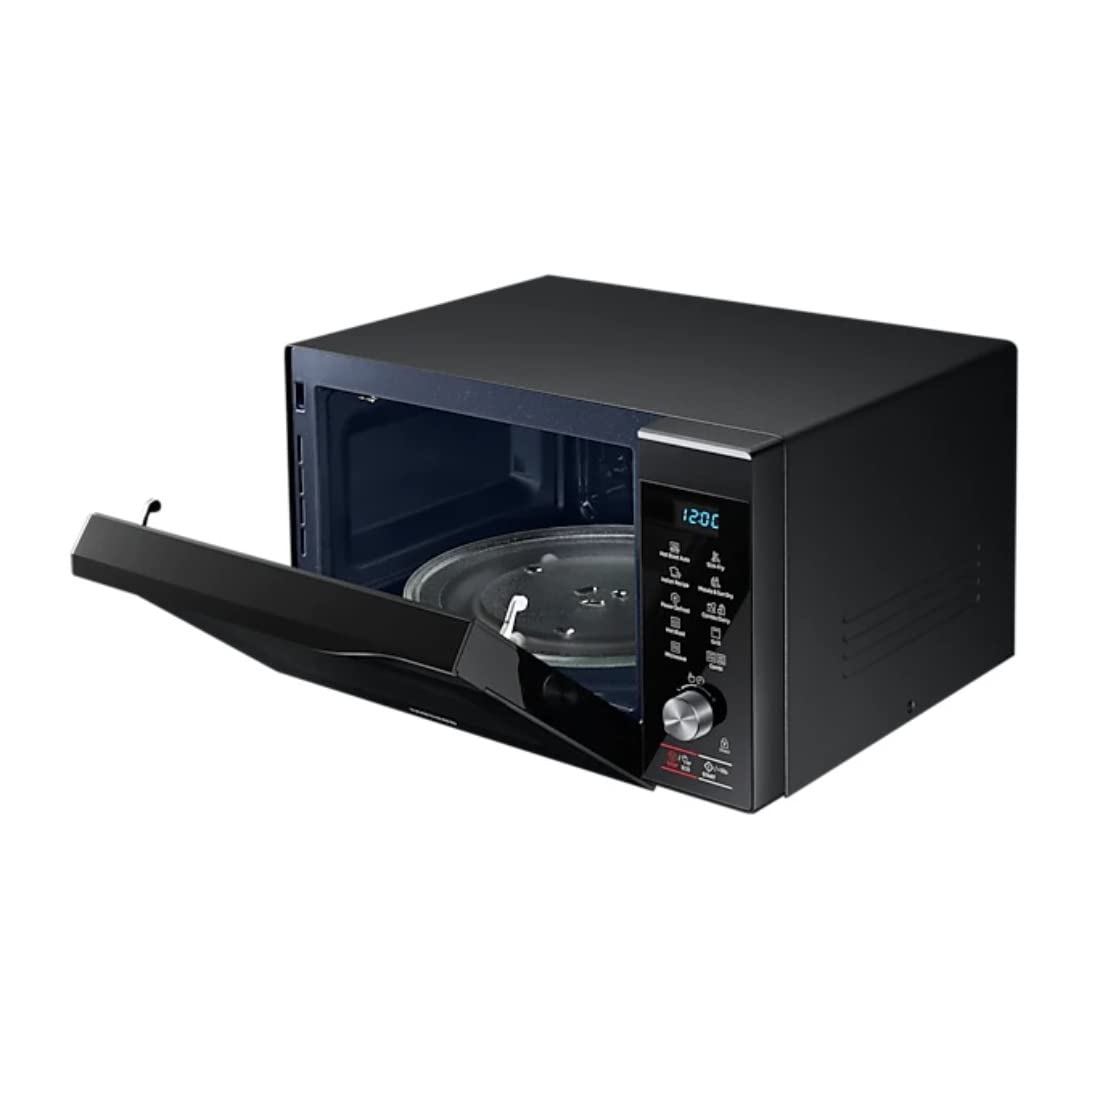 Samsung MC32A7056CK 32 L Convection Microwave Oven